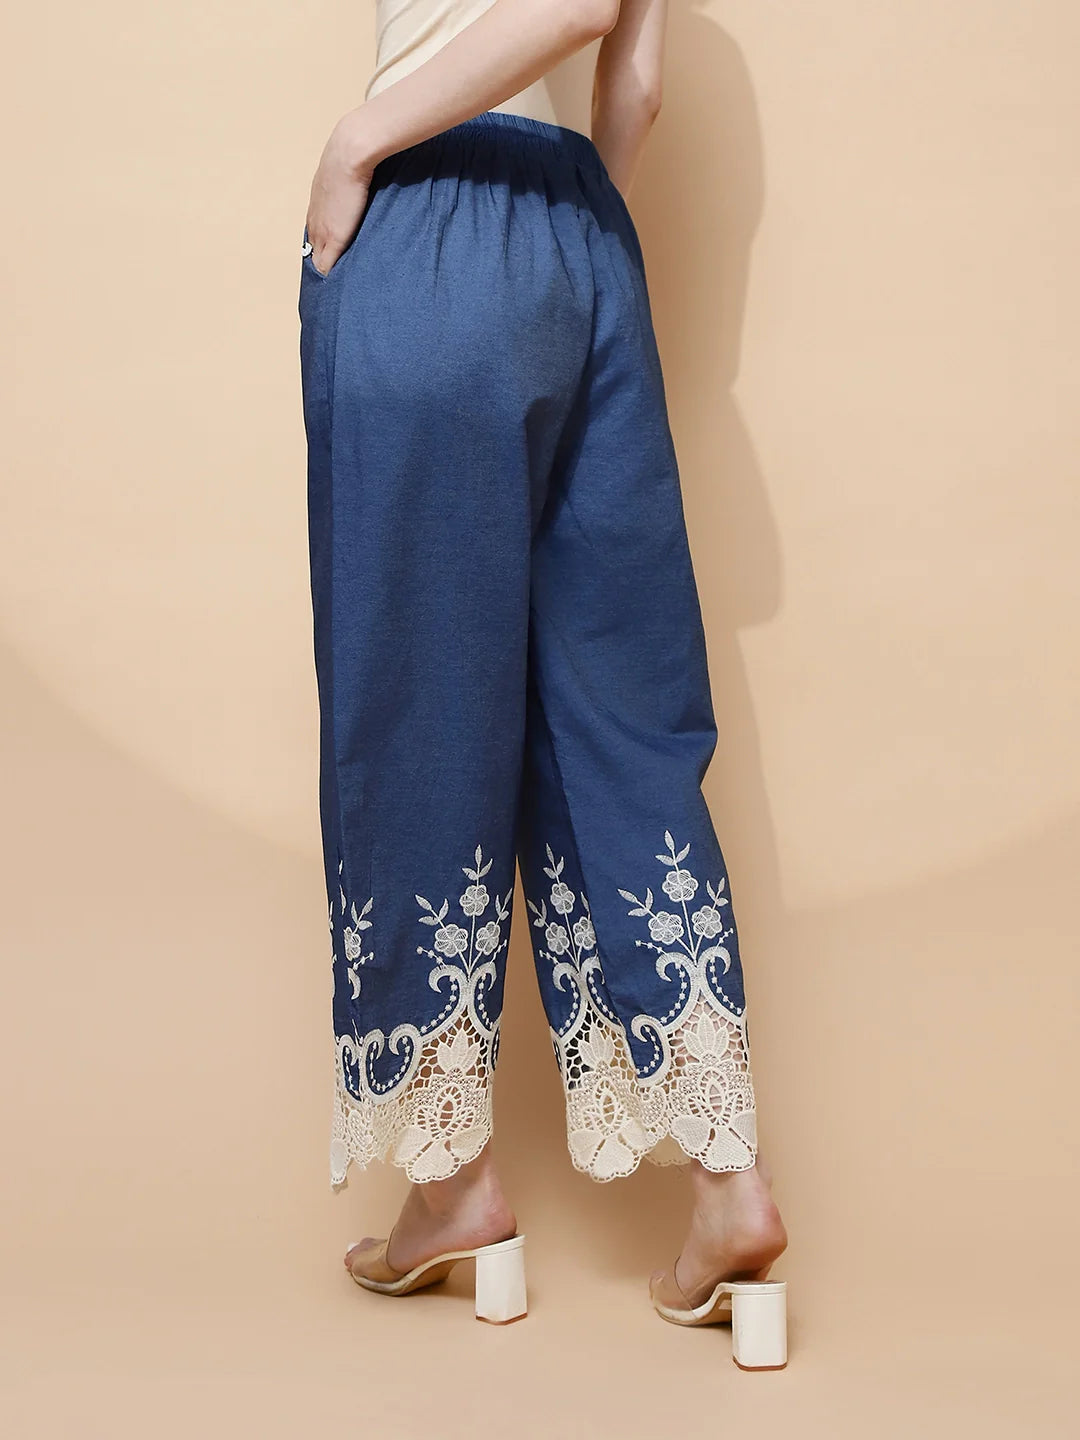 Blue Polycotton Regular Fit Lower For Women